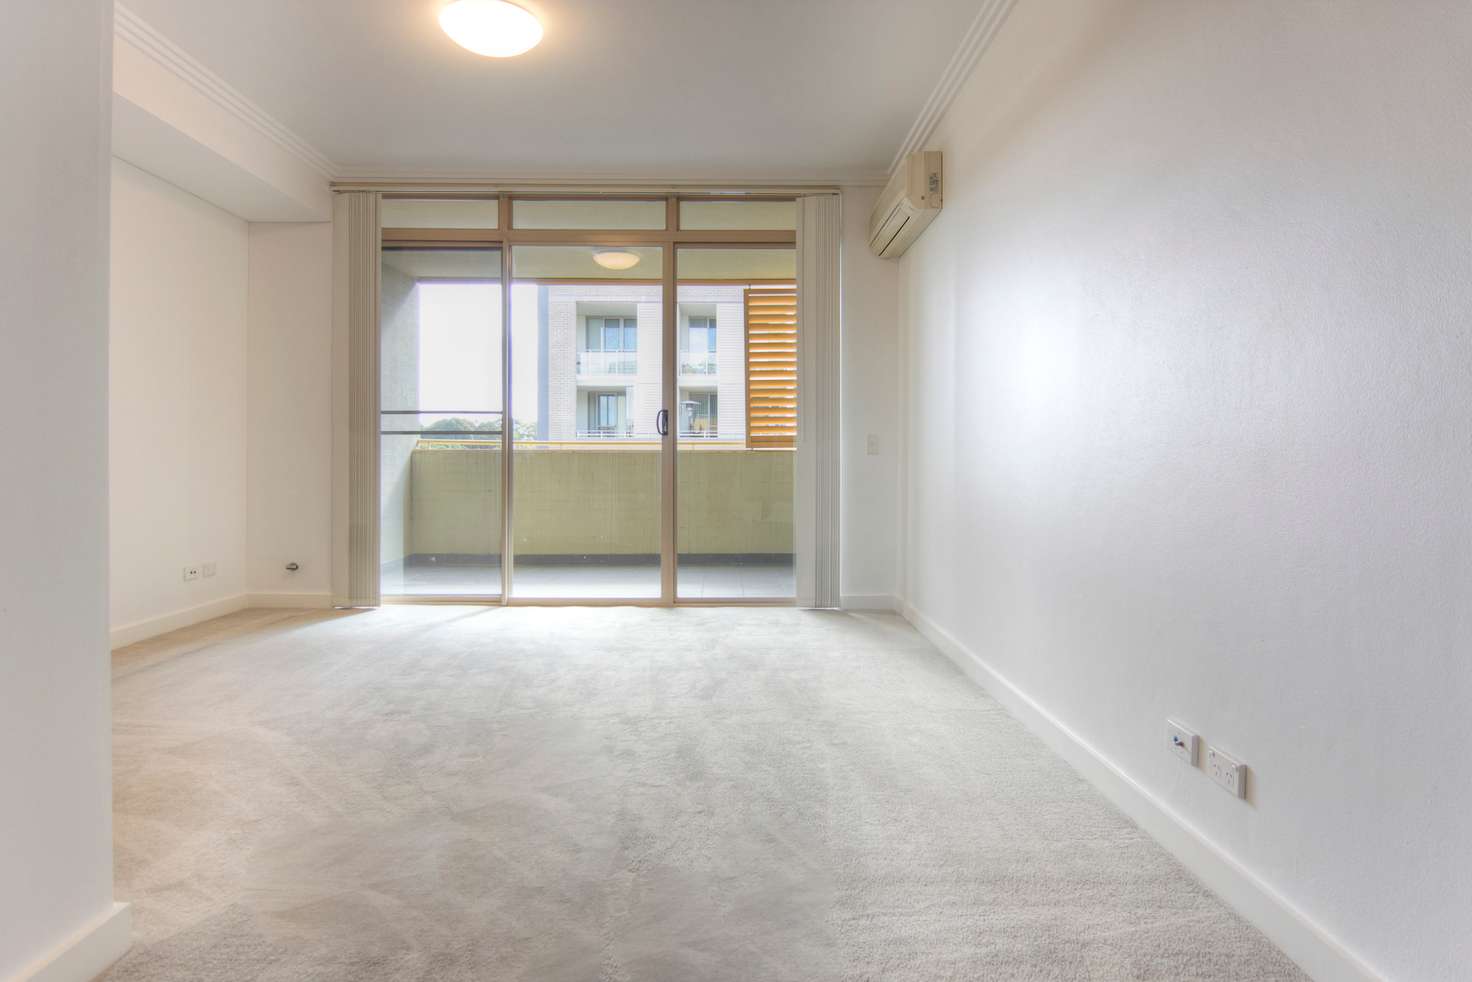 Main view of Homely apartment listing, 302/4 Stromboli Strait, Wentworth Point NSW 2127